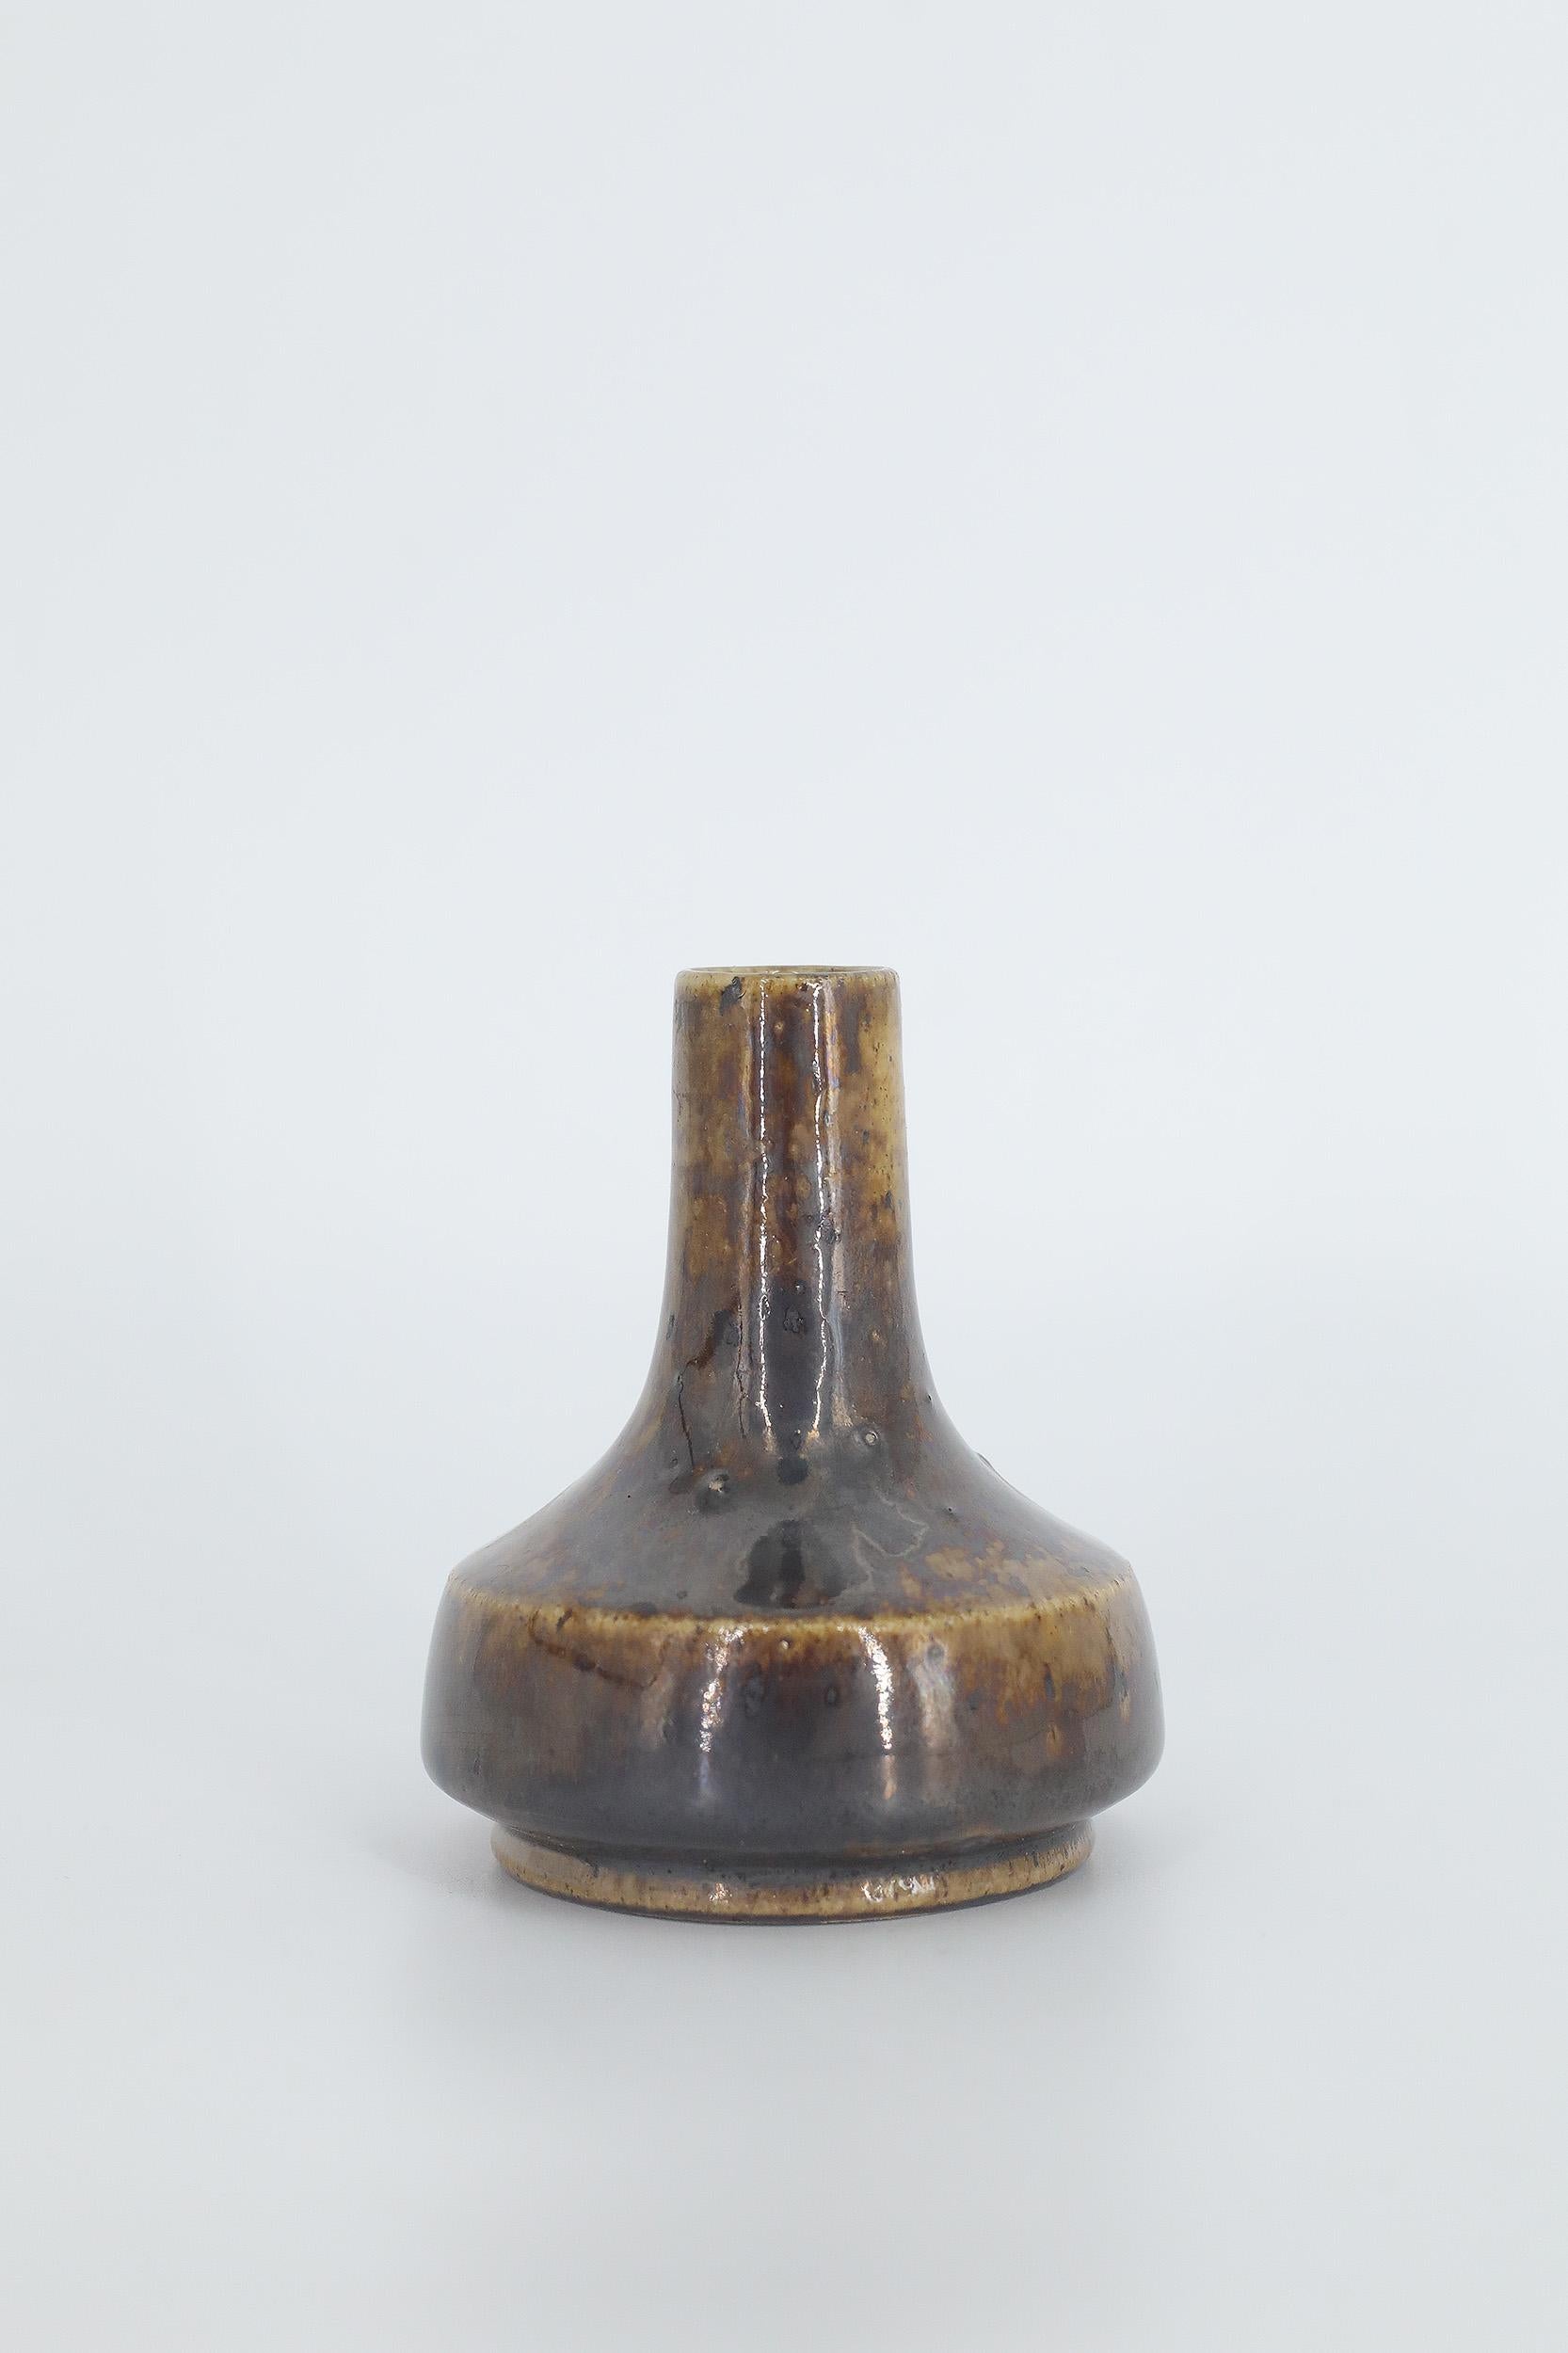 This miniature, collectible stoneware vase was designed by Gunnar Borg for the Swedish manufacture Höganäs Keramik during the 1960s. Handmade by a Master, with the utmost care and attention to details. The brown-colored vase with an irregular shade.